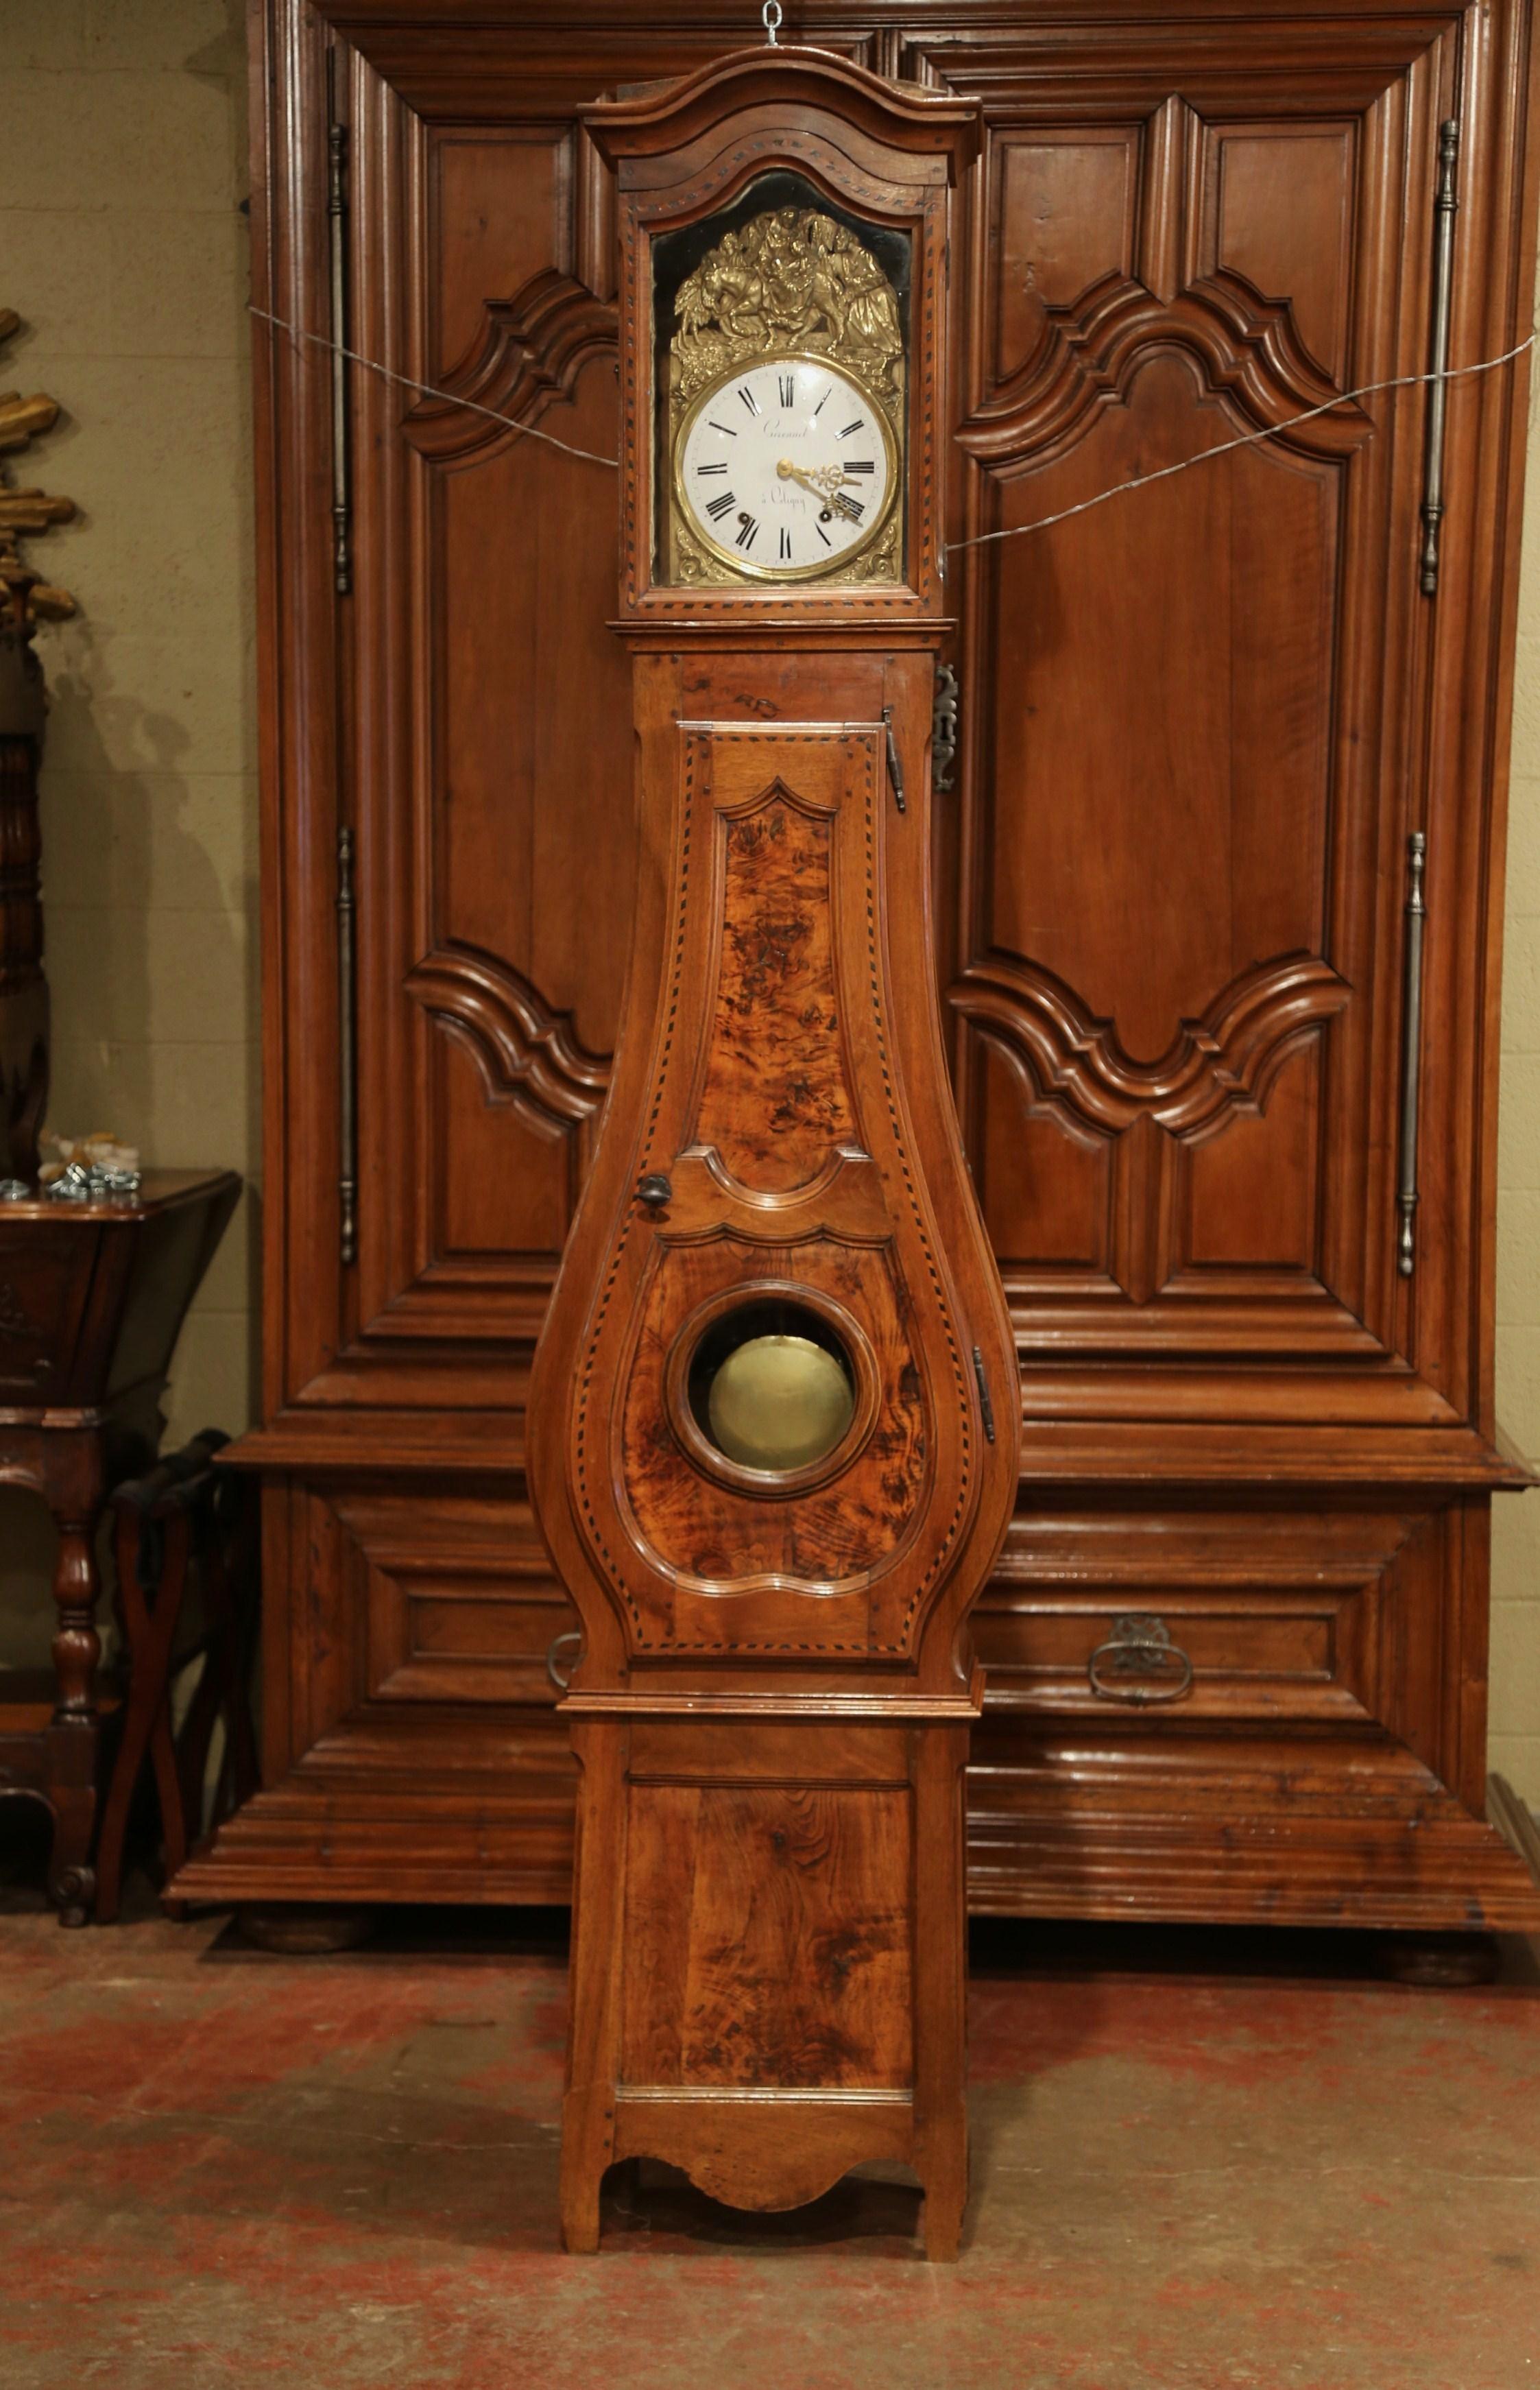 Crafted in lyon, France, circa 1780, the antique fruitwood tall case clock features beautiful carved lines including a bonnet top, a violin shape body style and scrolled feet under a scalloped apron at the base; it is further embellished with